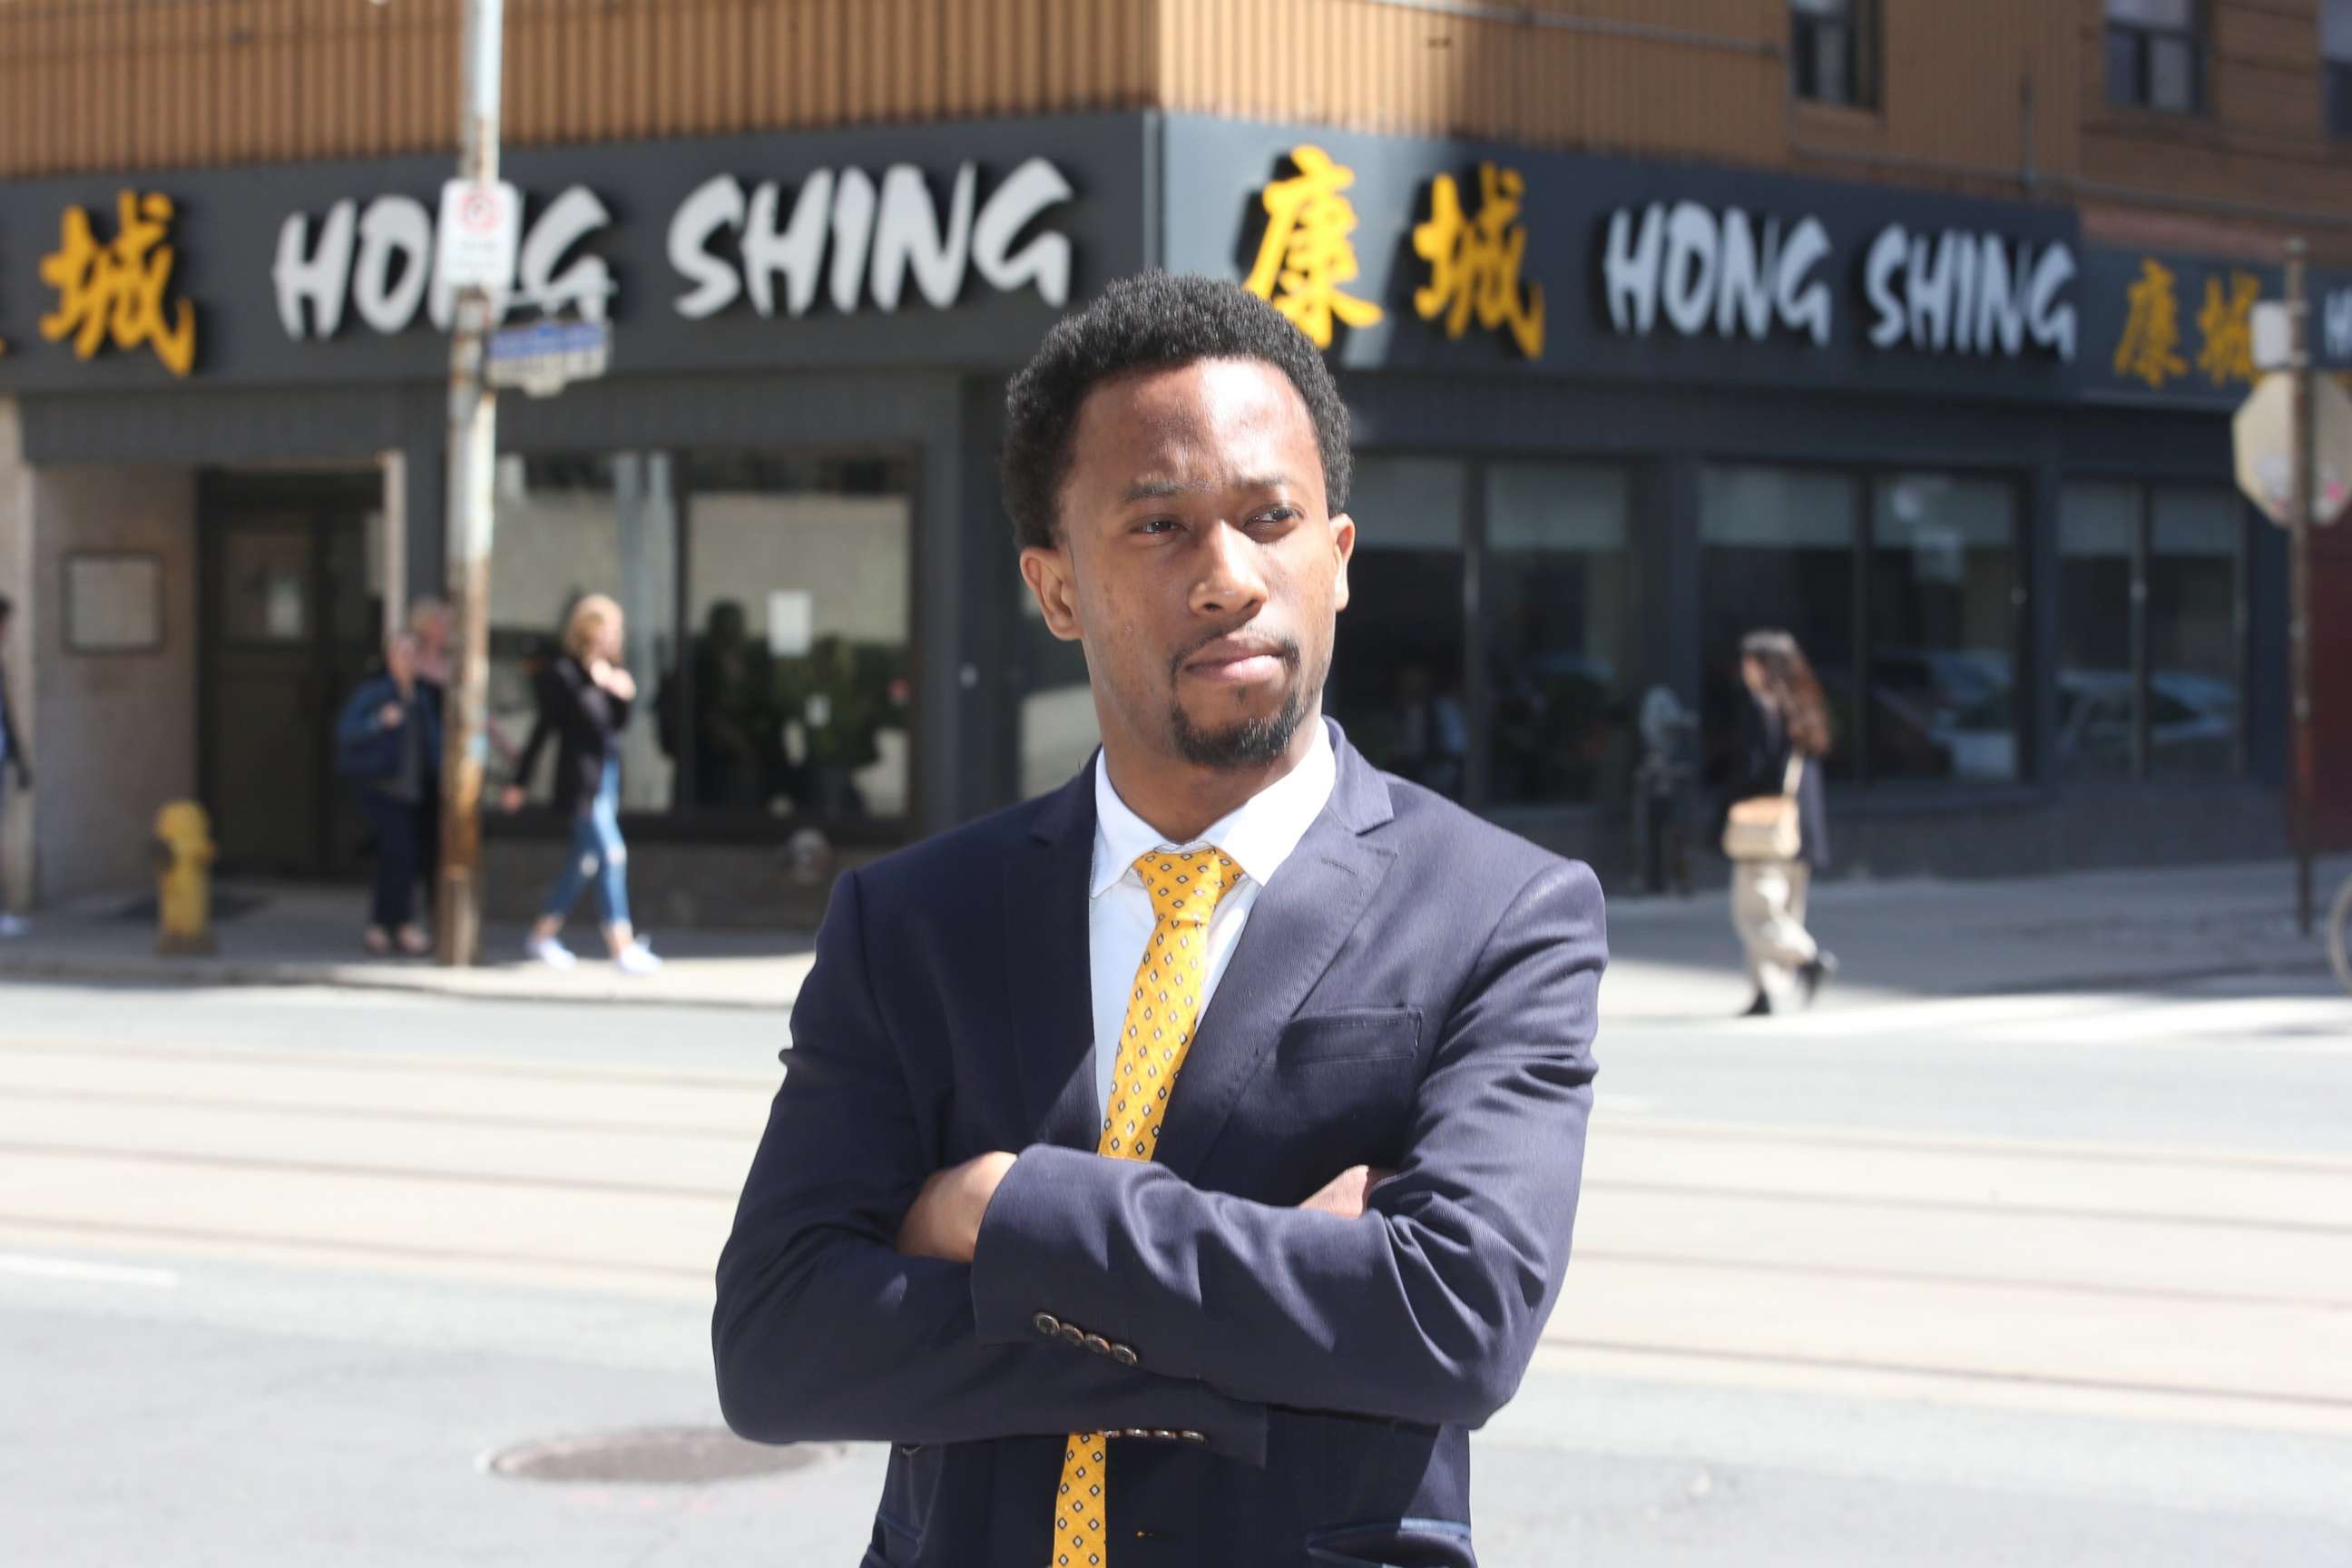 PHOTO: Emile Wickham stands in front of the Hong Shing Chinese restaurant in Toronto on April 30, 2018.